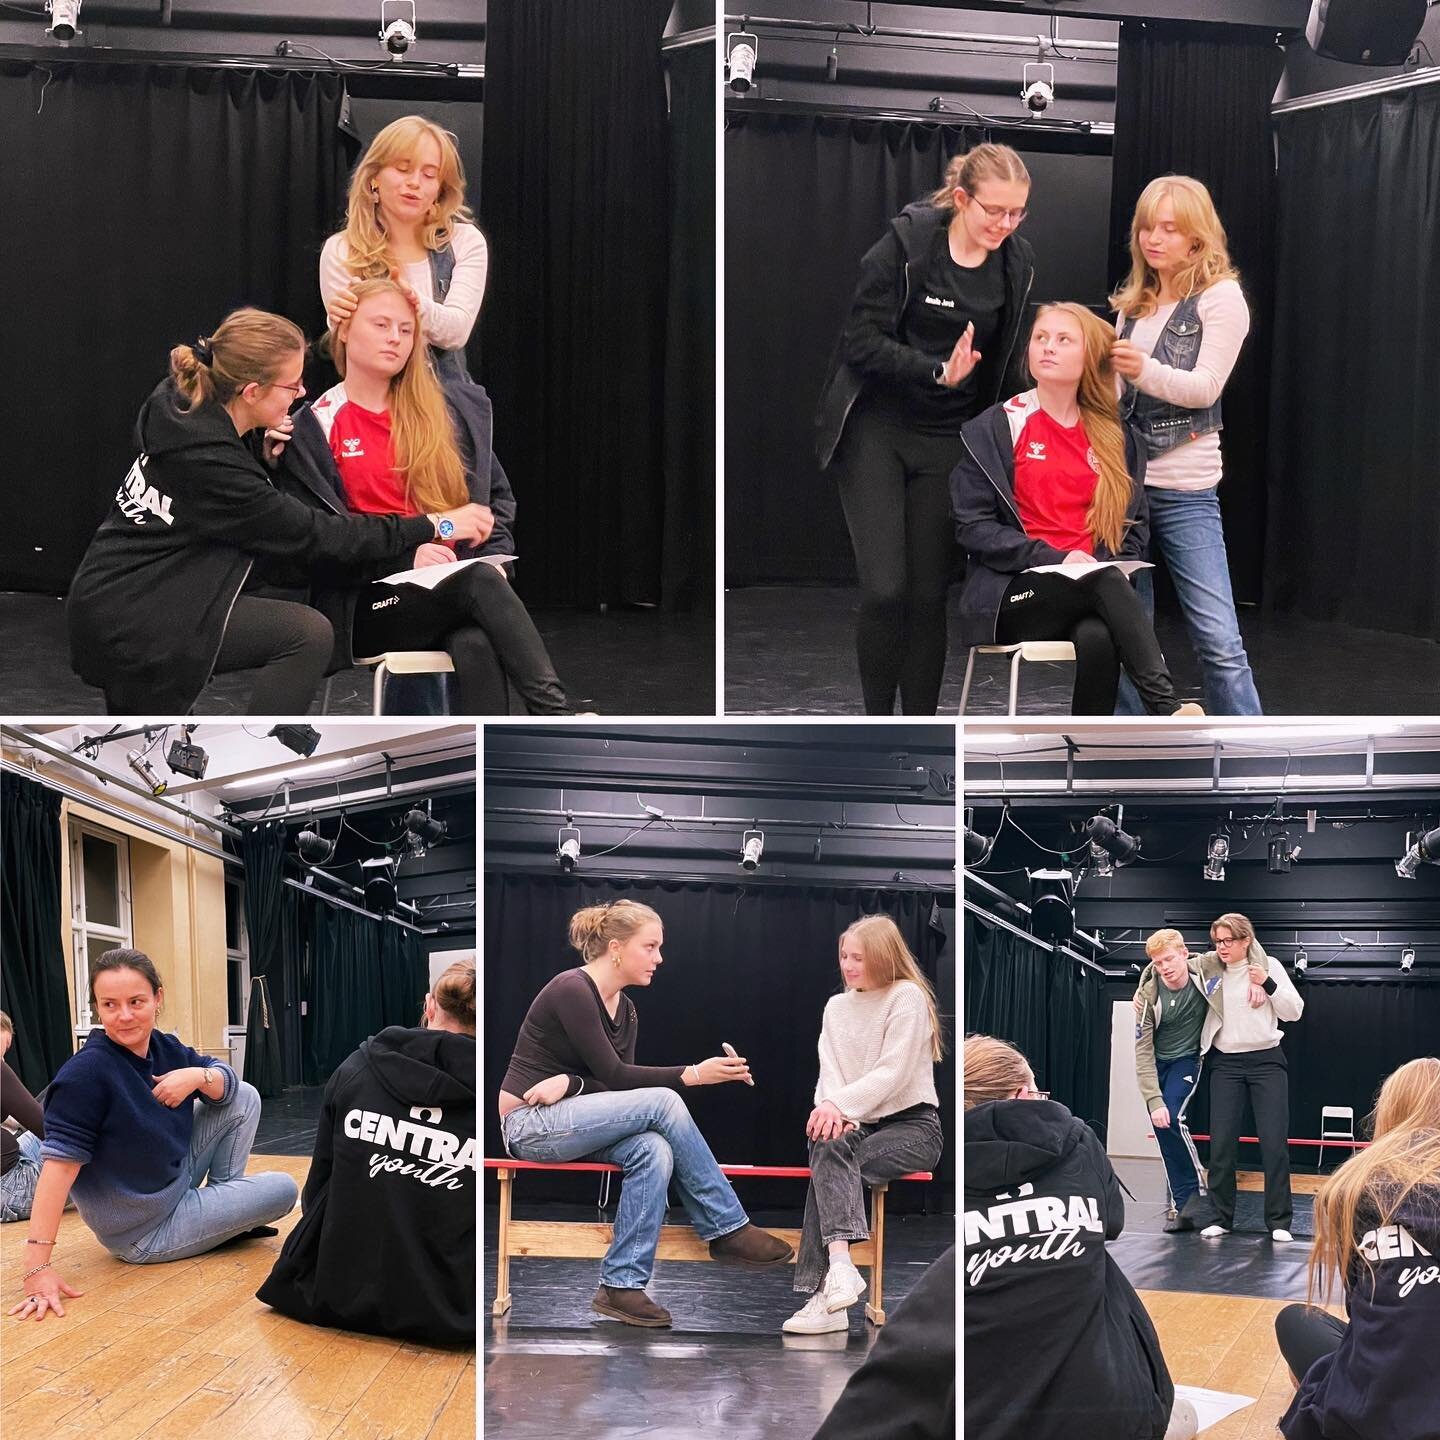 Drama at Central Youth 🎭
From drama games and exercises to feel safe and confident with @markagerskov to developing text work with @ann_hoelund !